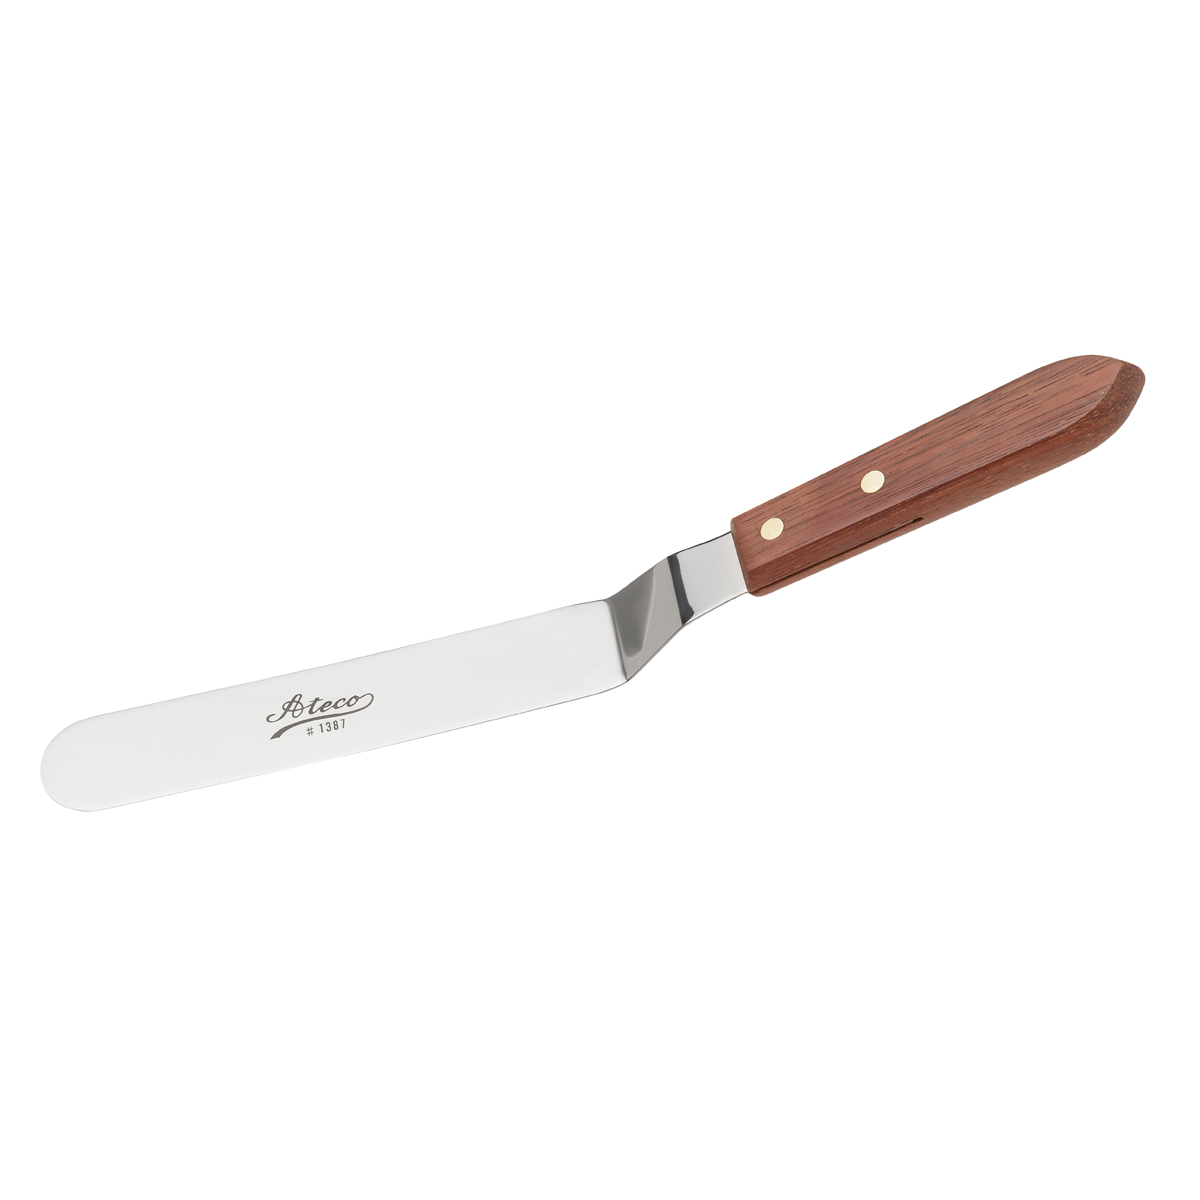 Ateco Spatula Wooden Handle Offset Blade - Size: Blade size 3/4" x 4-1/2"